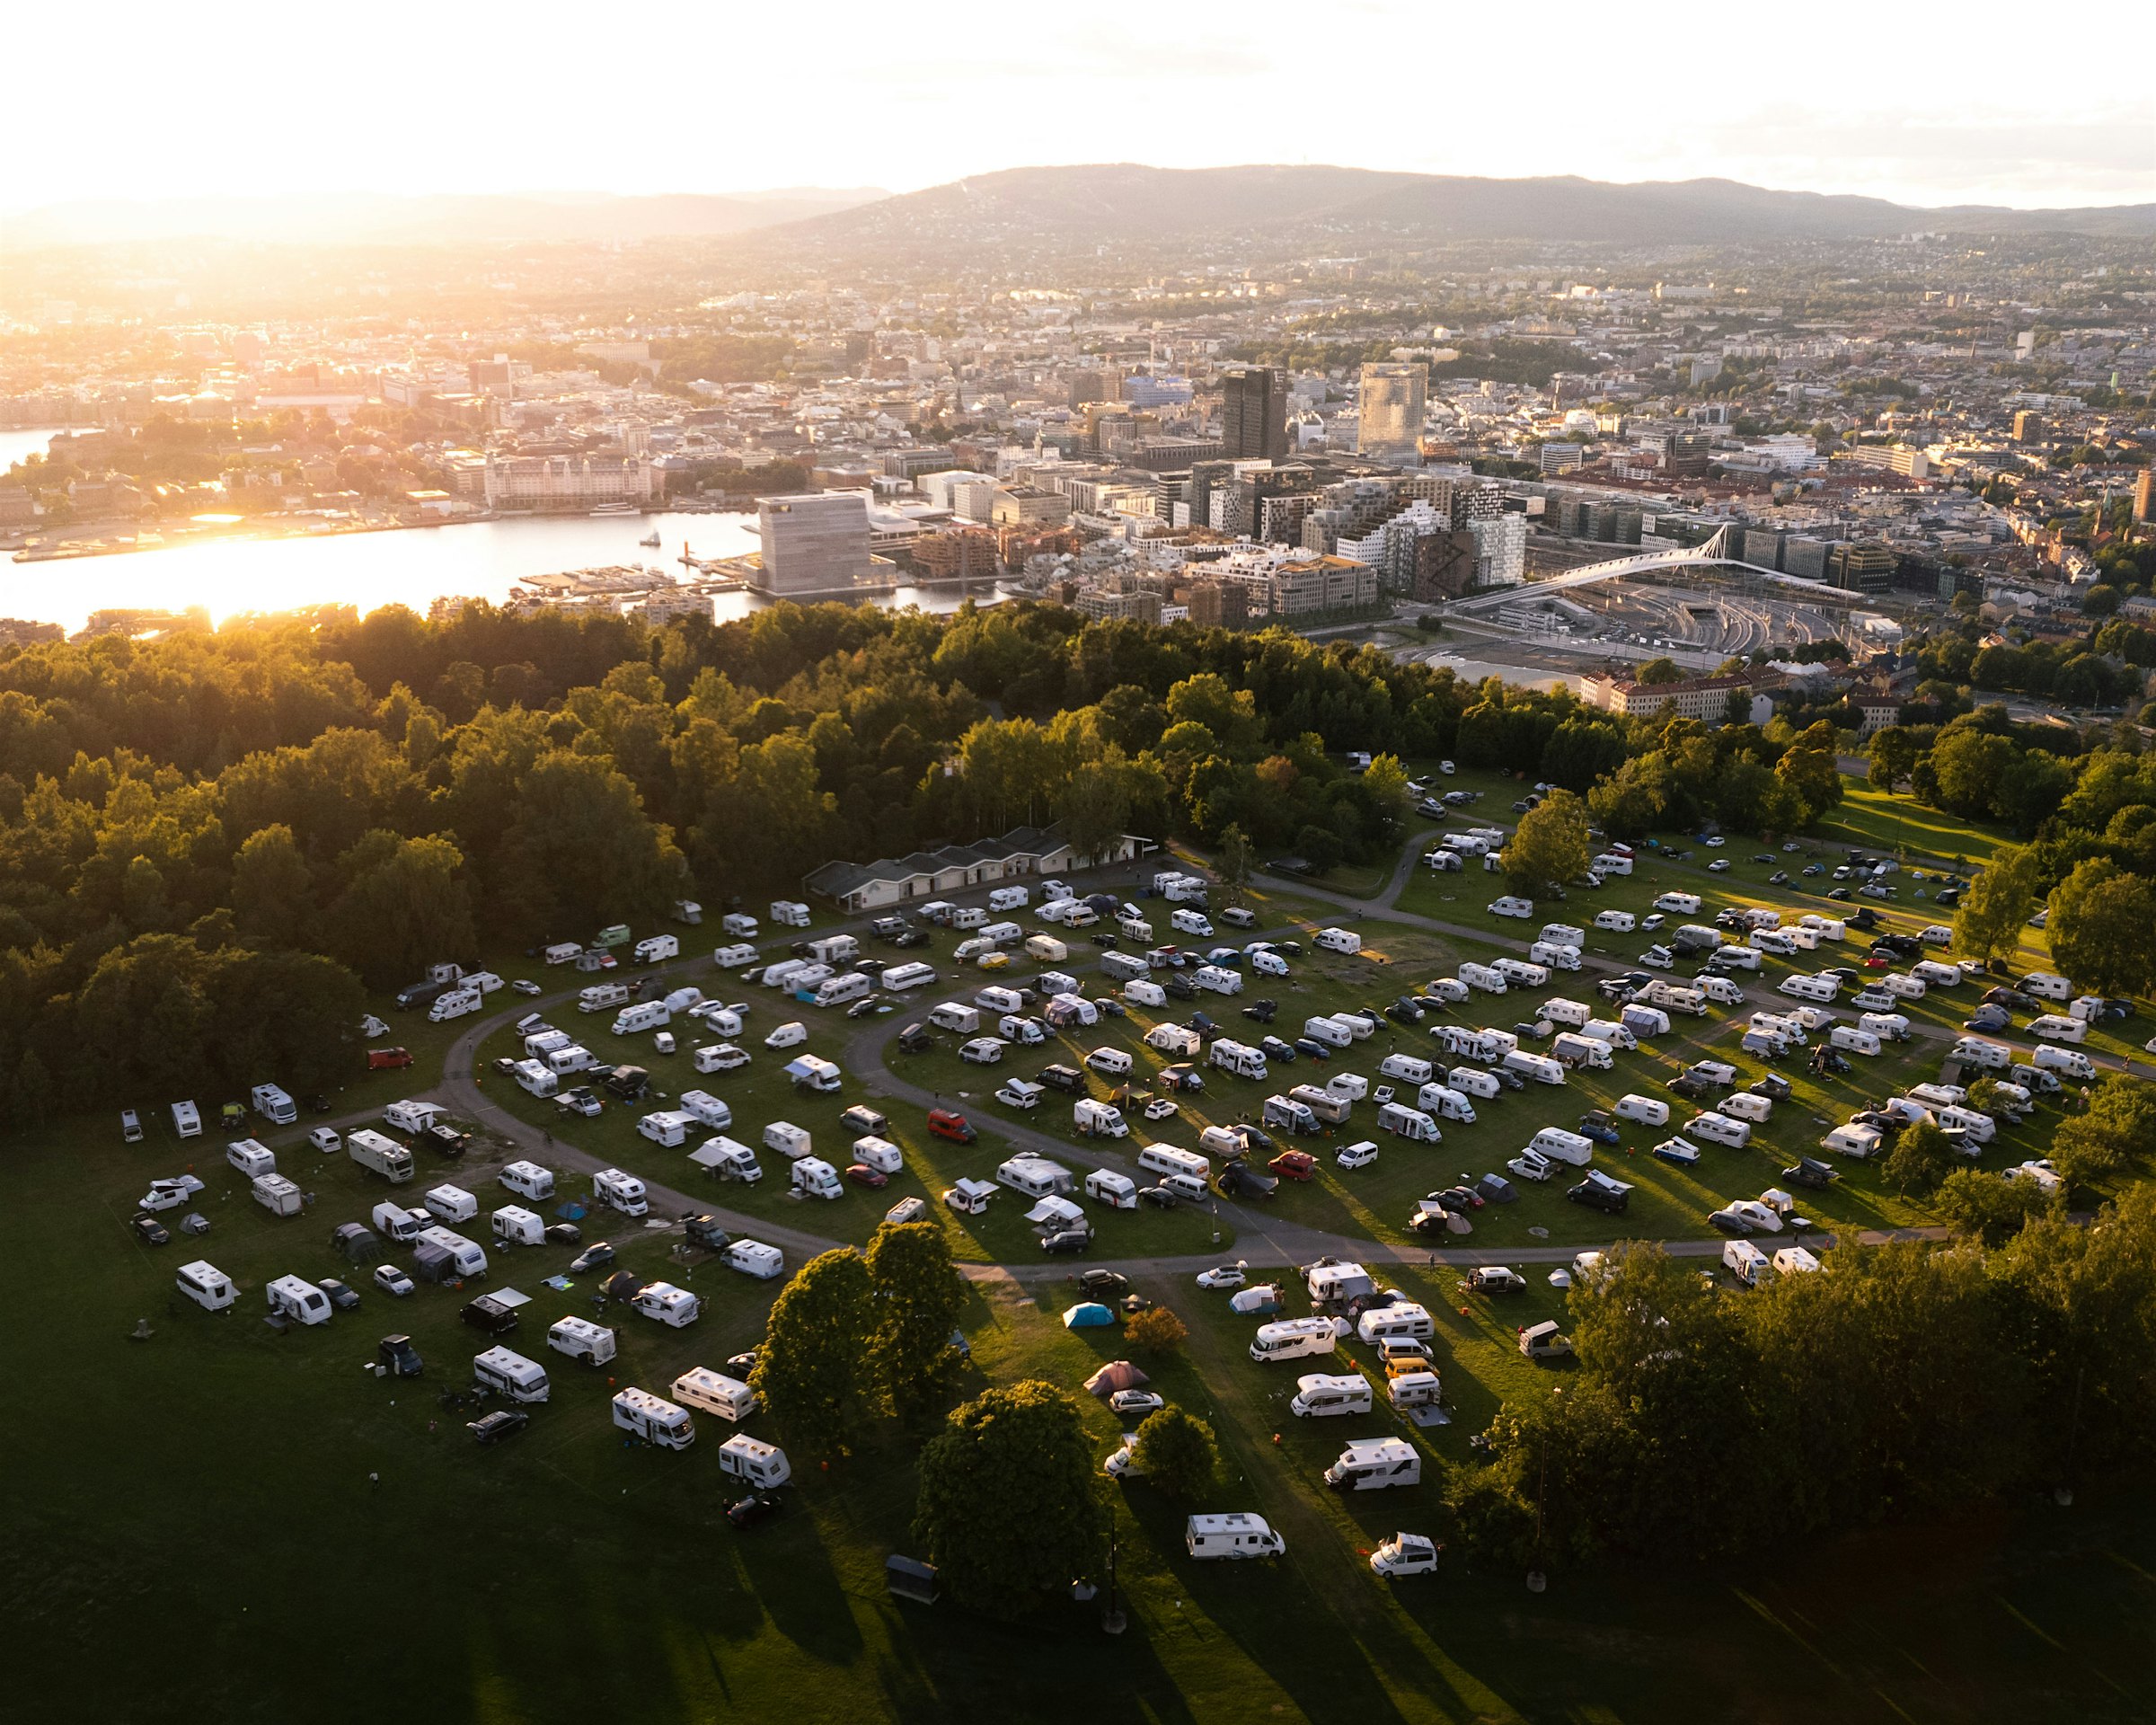 Drone image of Topcamp Ekeberg, showing Oslo city center in the background. Forest and sea